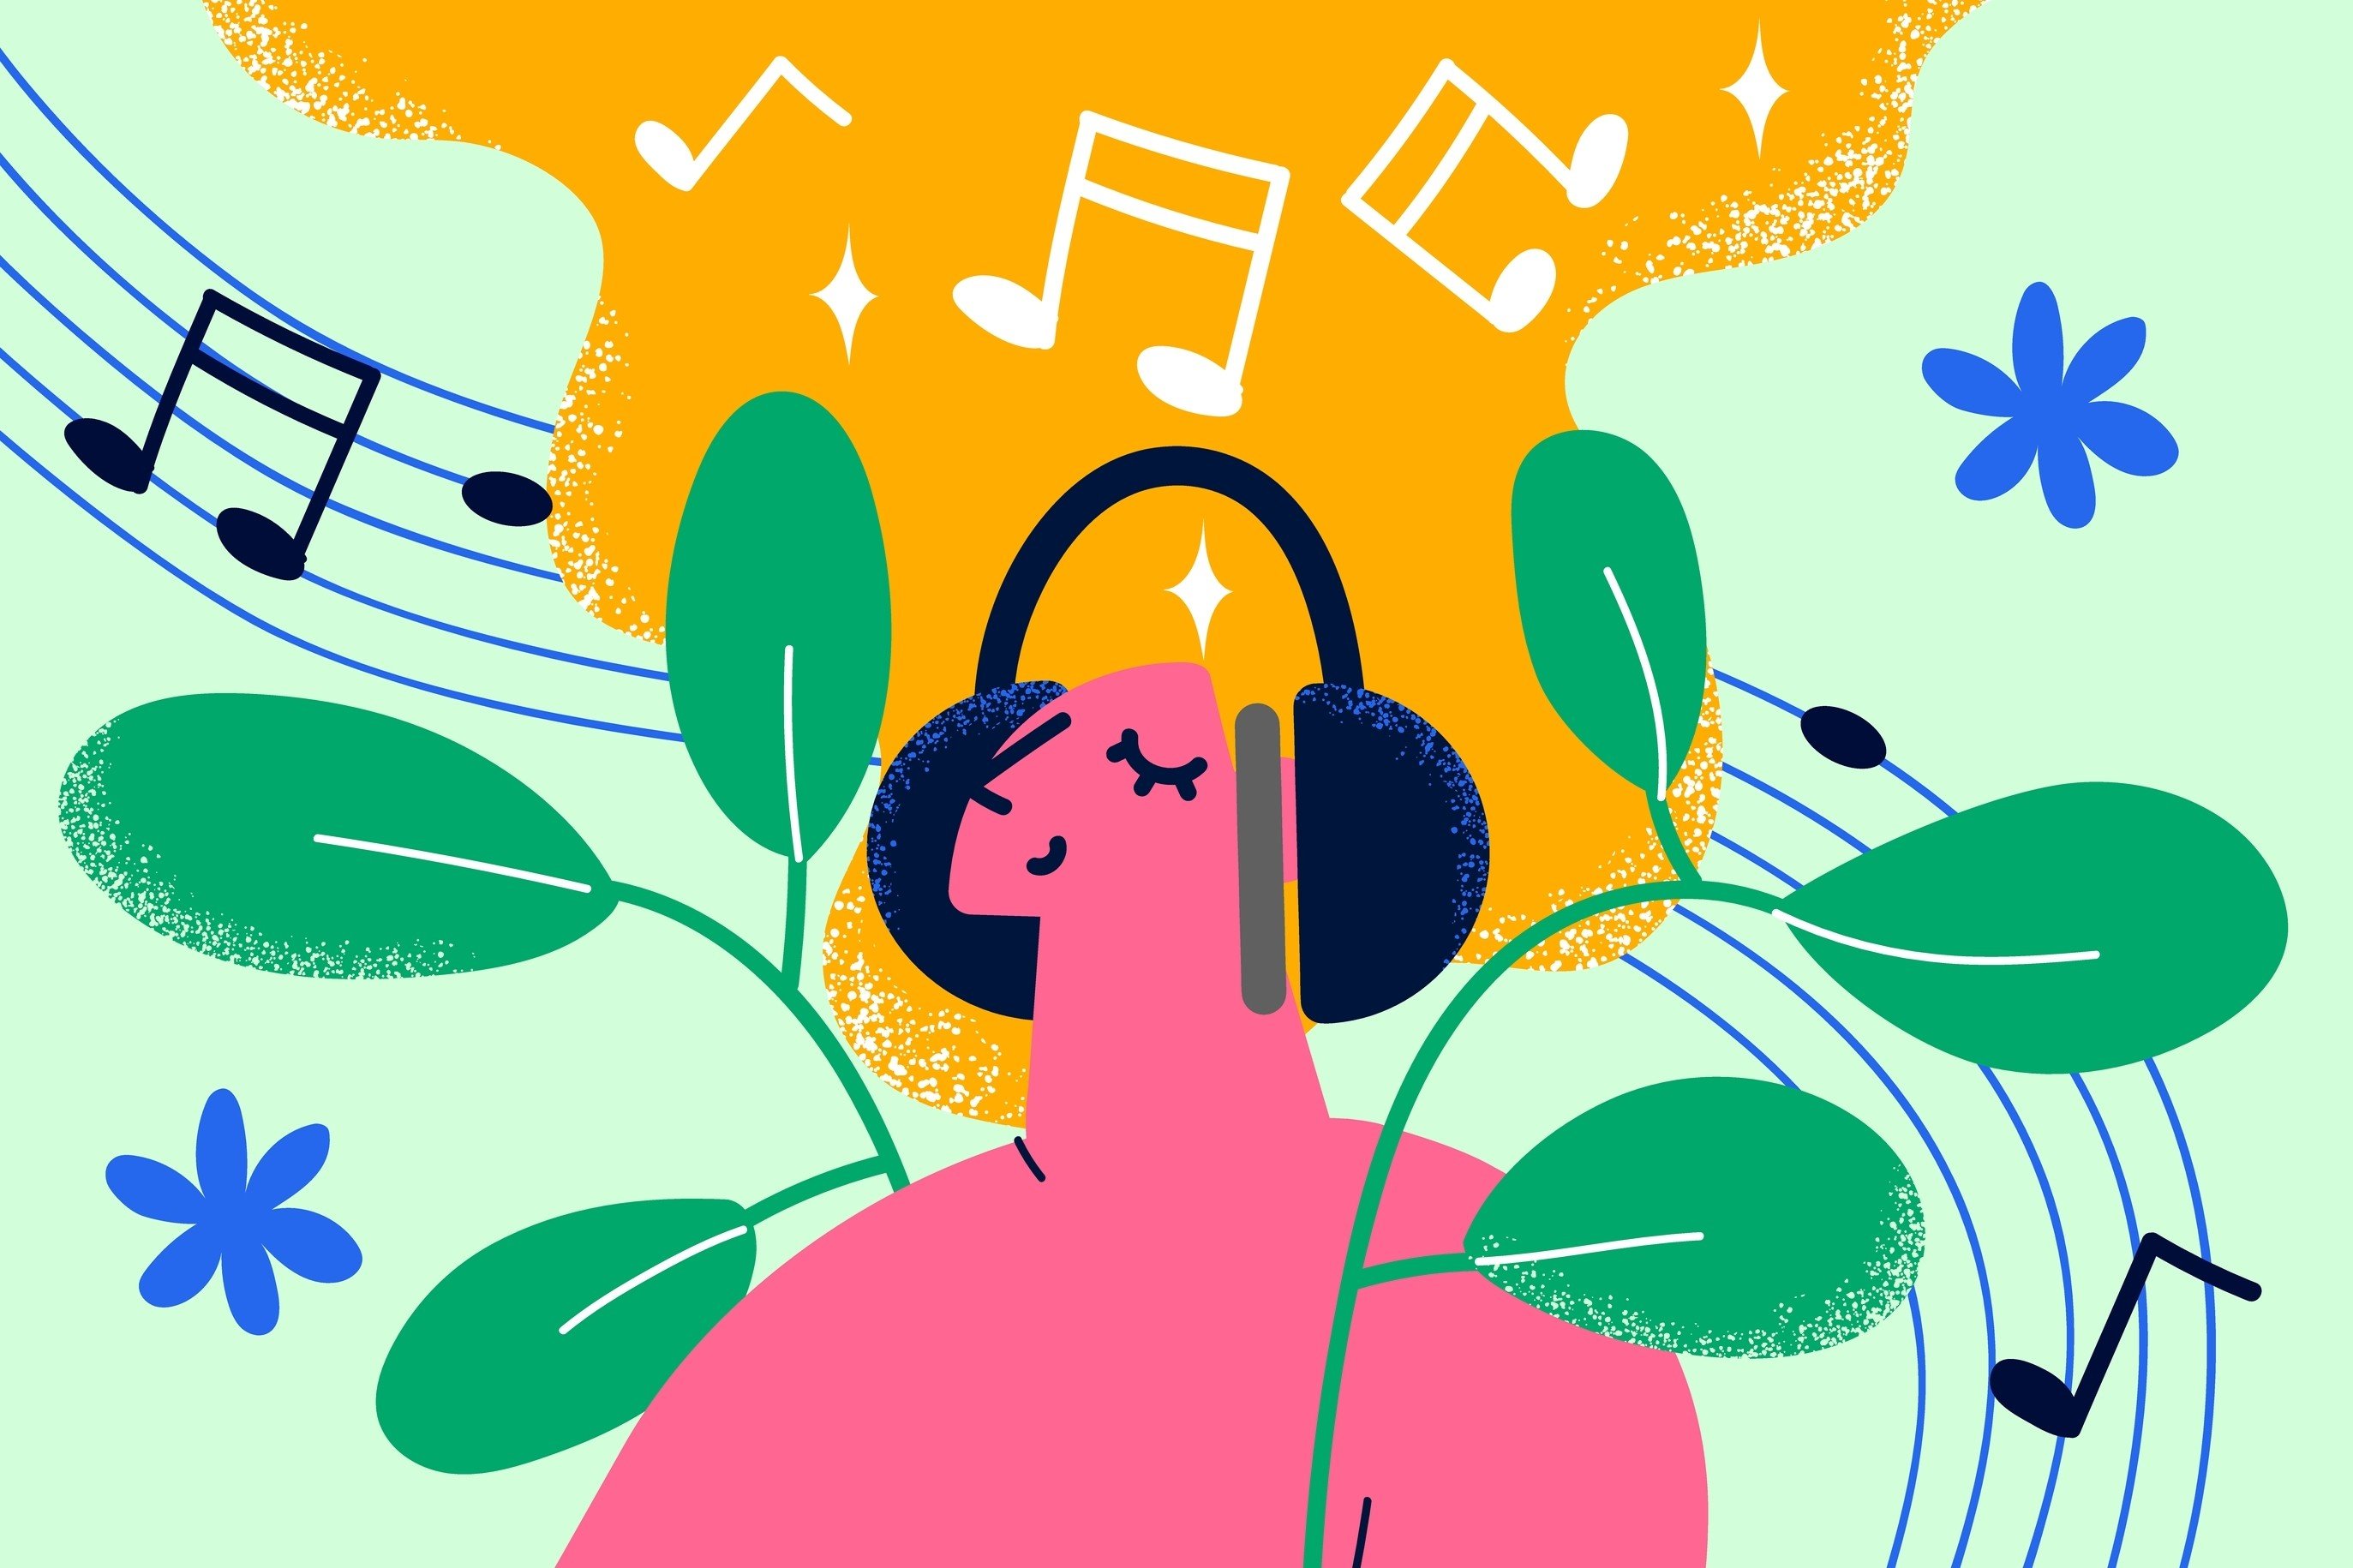 Have you ever had a song stuck in your head that wouldn’t go away? You might be able to use that to study! Photo: Shutterstock